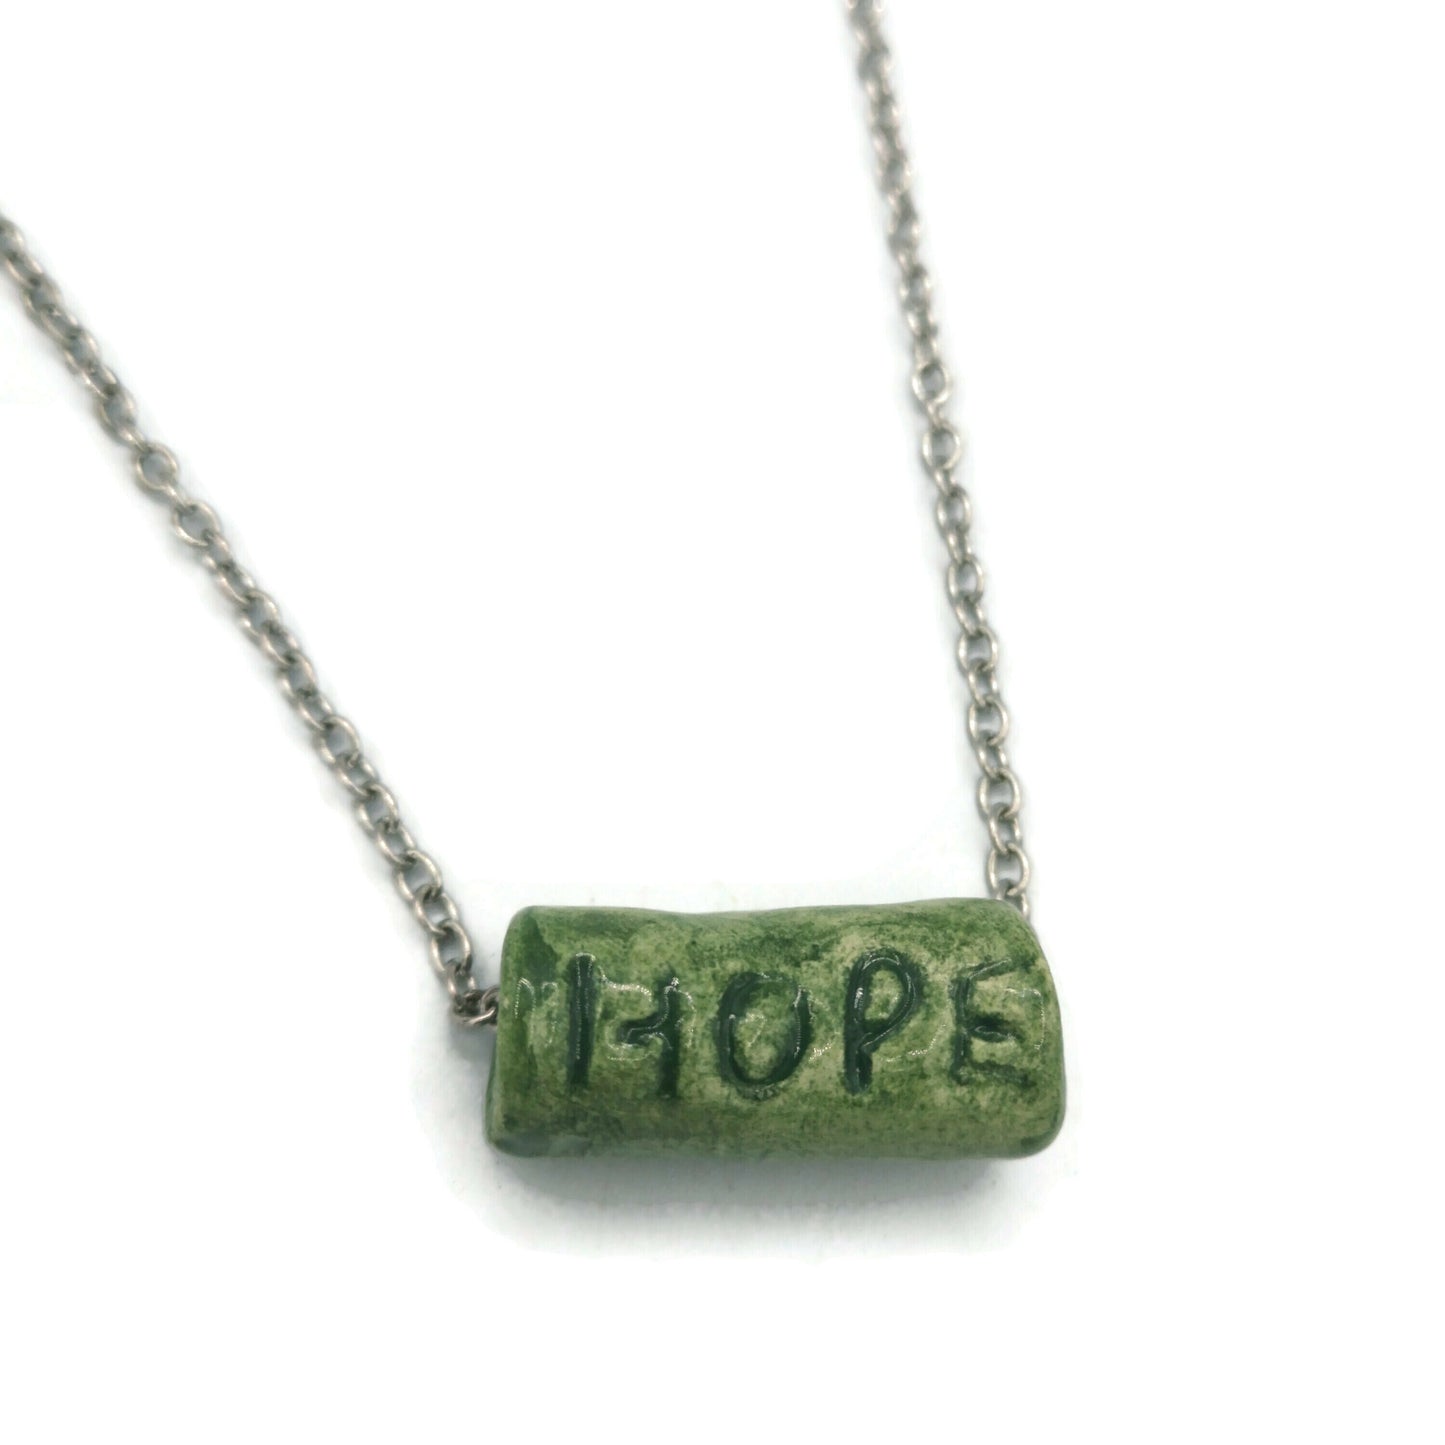 Trendy Necklace Hope Bead, Best Gifts For Her, Meaningful Aesthetic Necklace Gift For Women, Mom Birthday Gift From Daughter, Best Sellers - Ceramica Ana Rafael